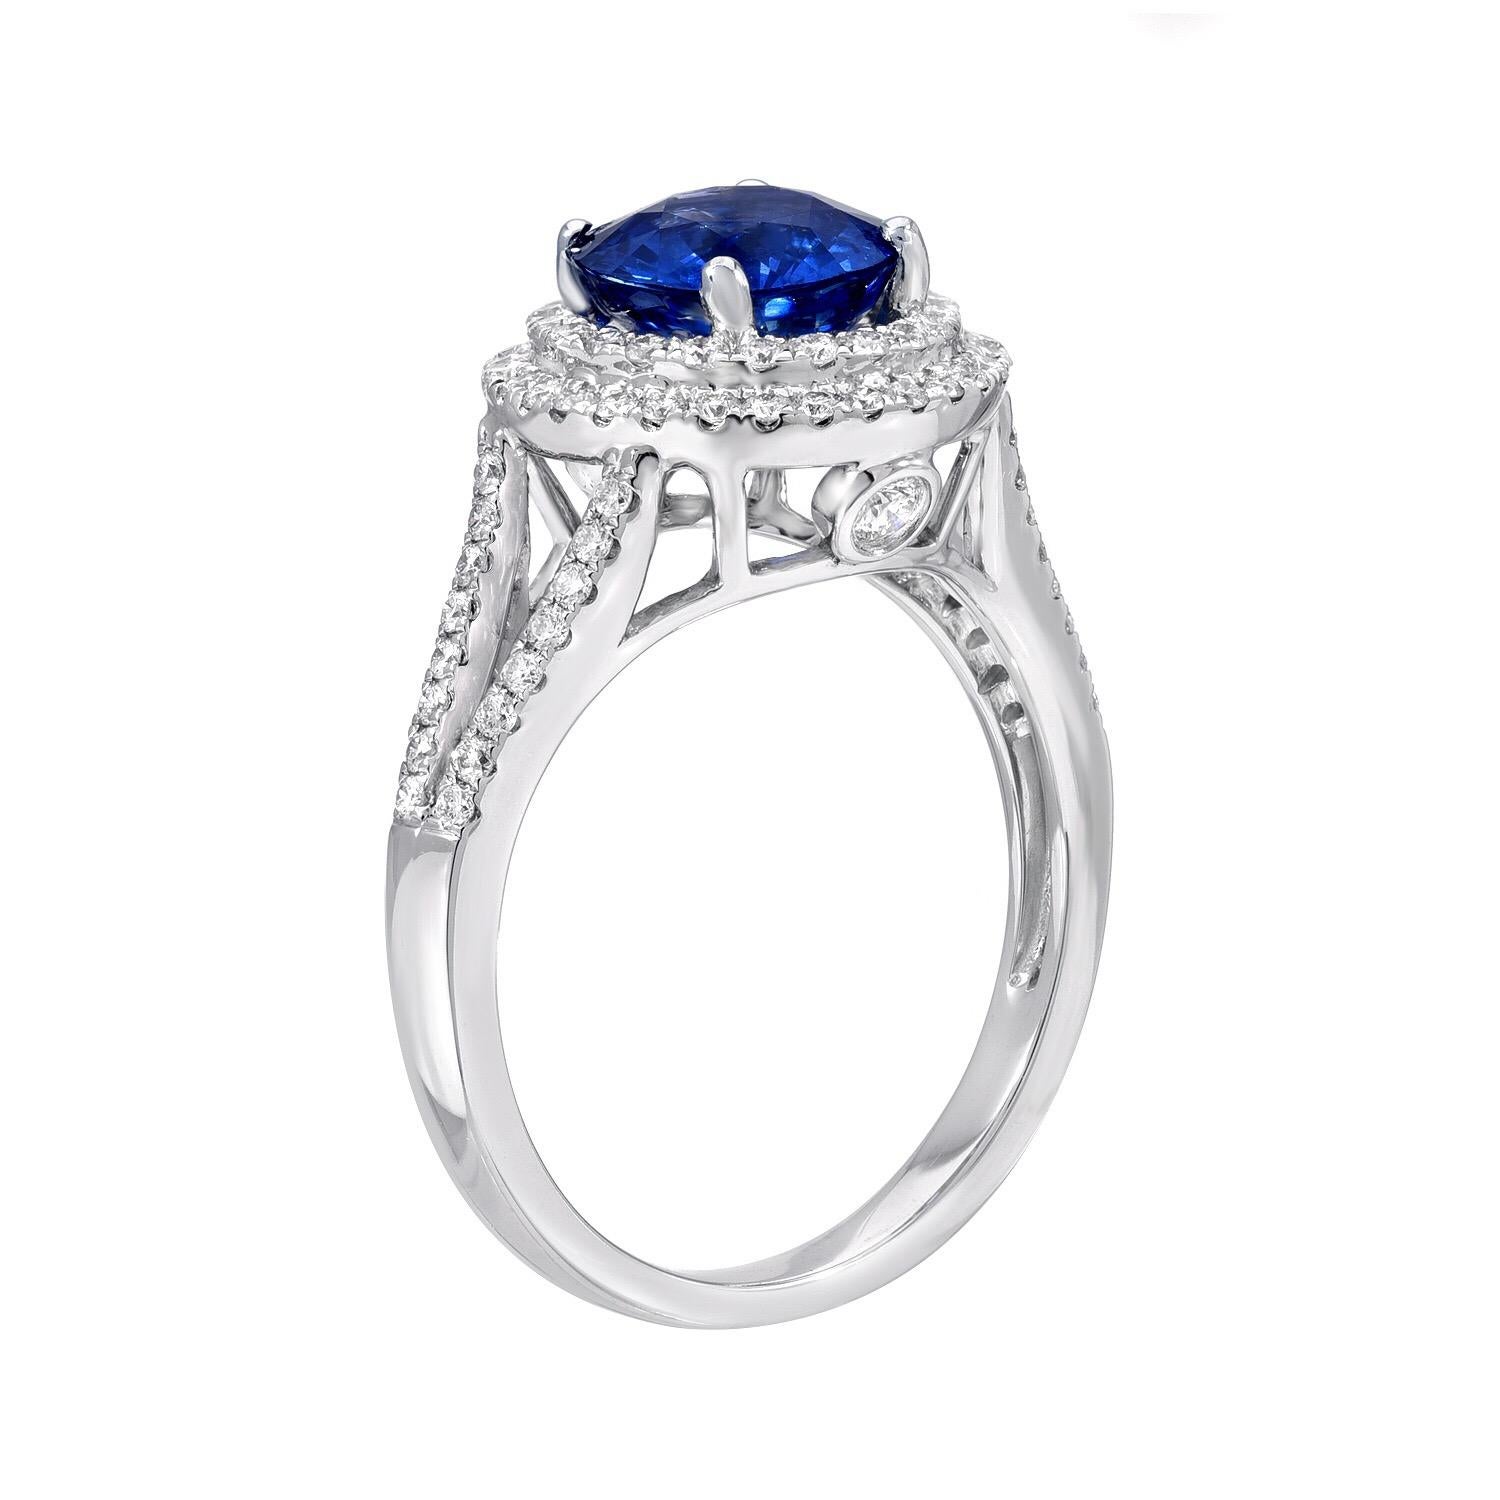 Sapphire ring showcasing a round Blue Sapphire, weighing a total of 2.12 carats, hand set in 18K white gold, and adorned by a total of 0.59 carat diamonds.
Size 6.5. Re-sizing is complimentary upon request.
Returns are accepted and paid by us within